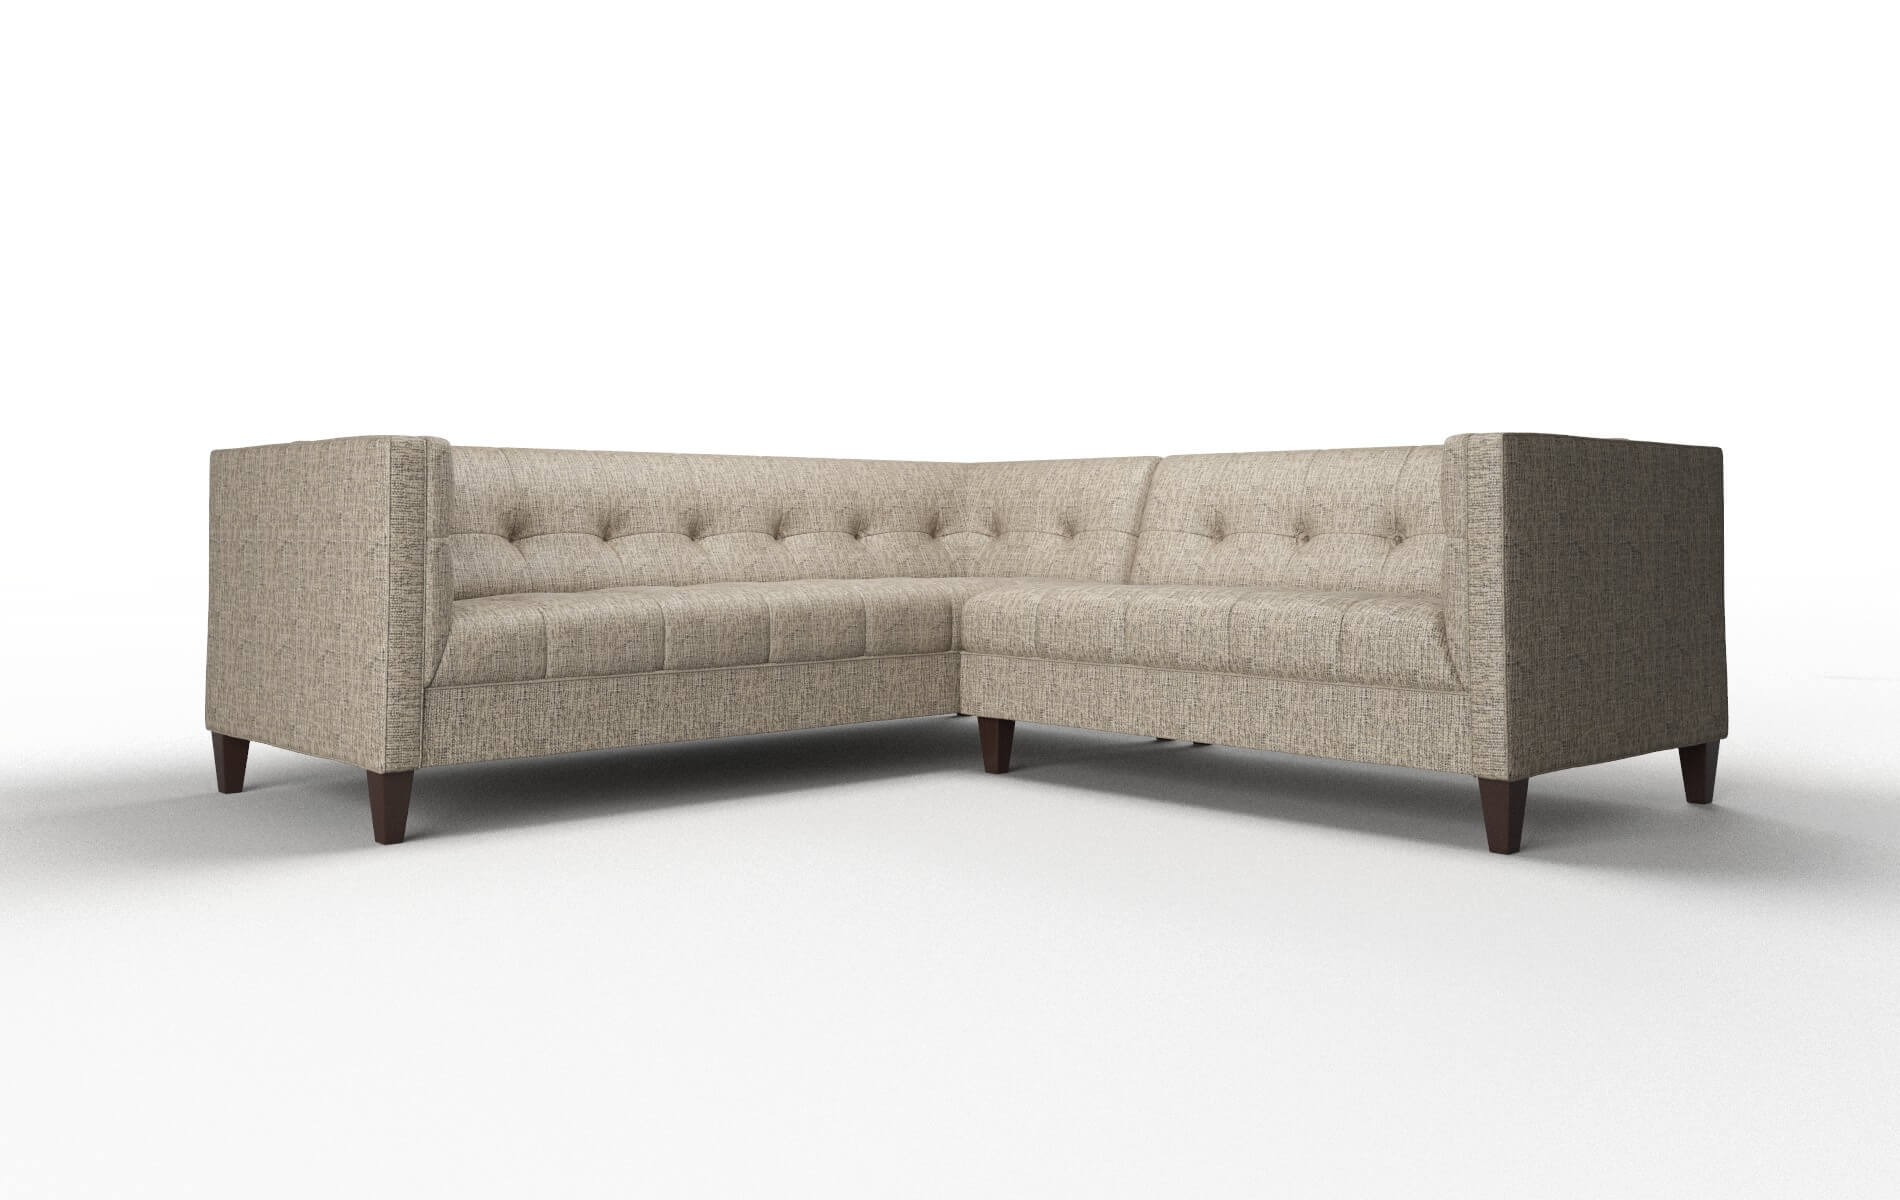 Messina Solifestyle 51 Sectional espresso legs 1